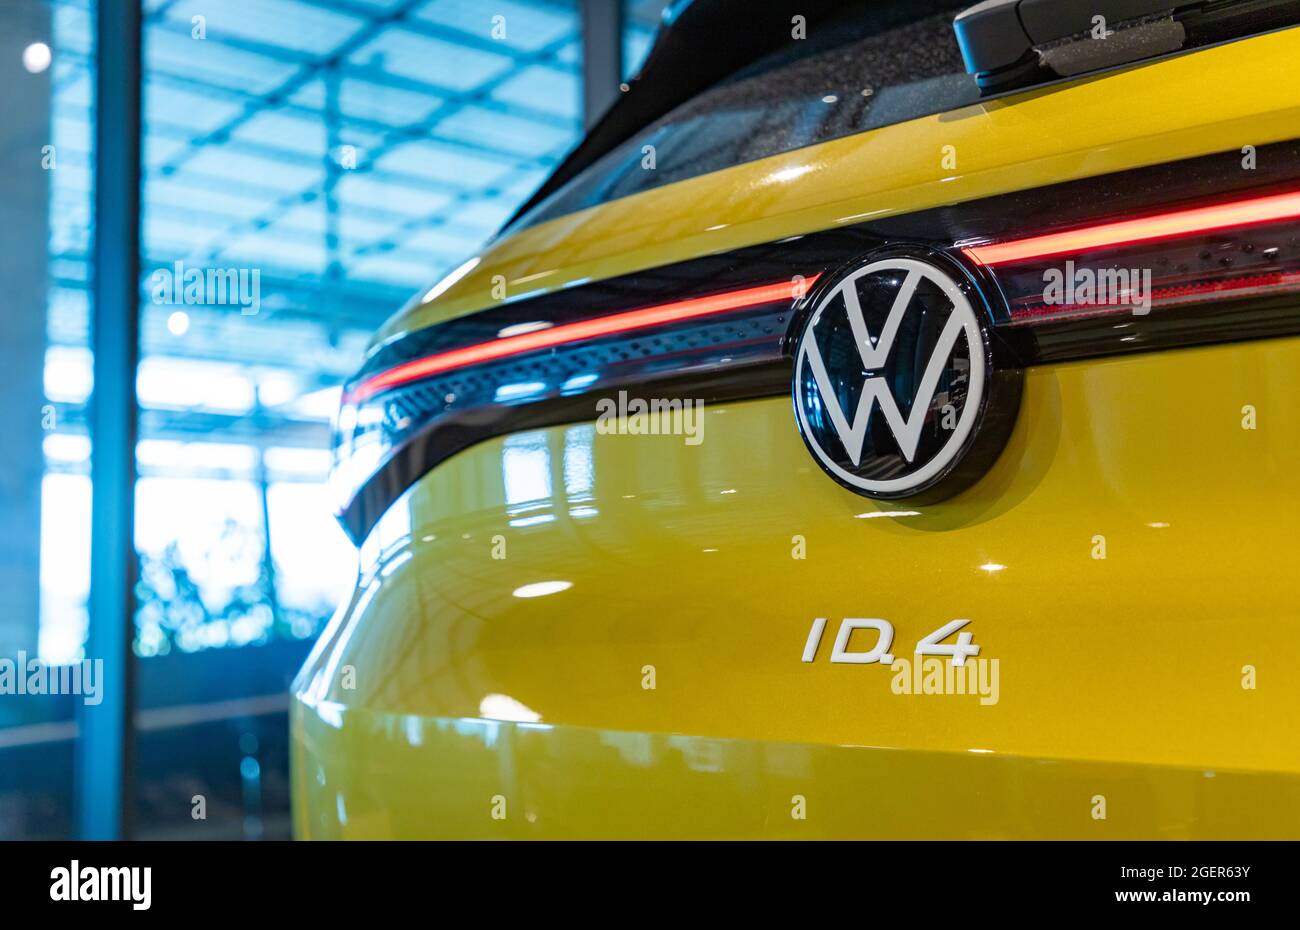 A picture of the back of a yellow Volkswagen ID.4. Stock Photo